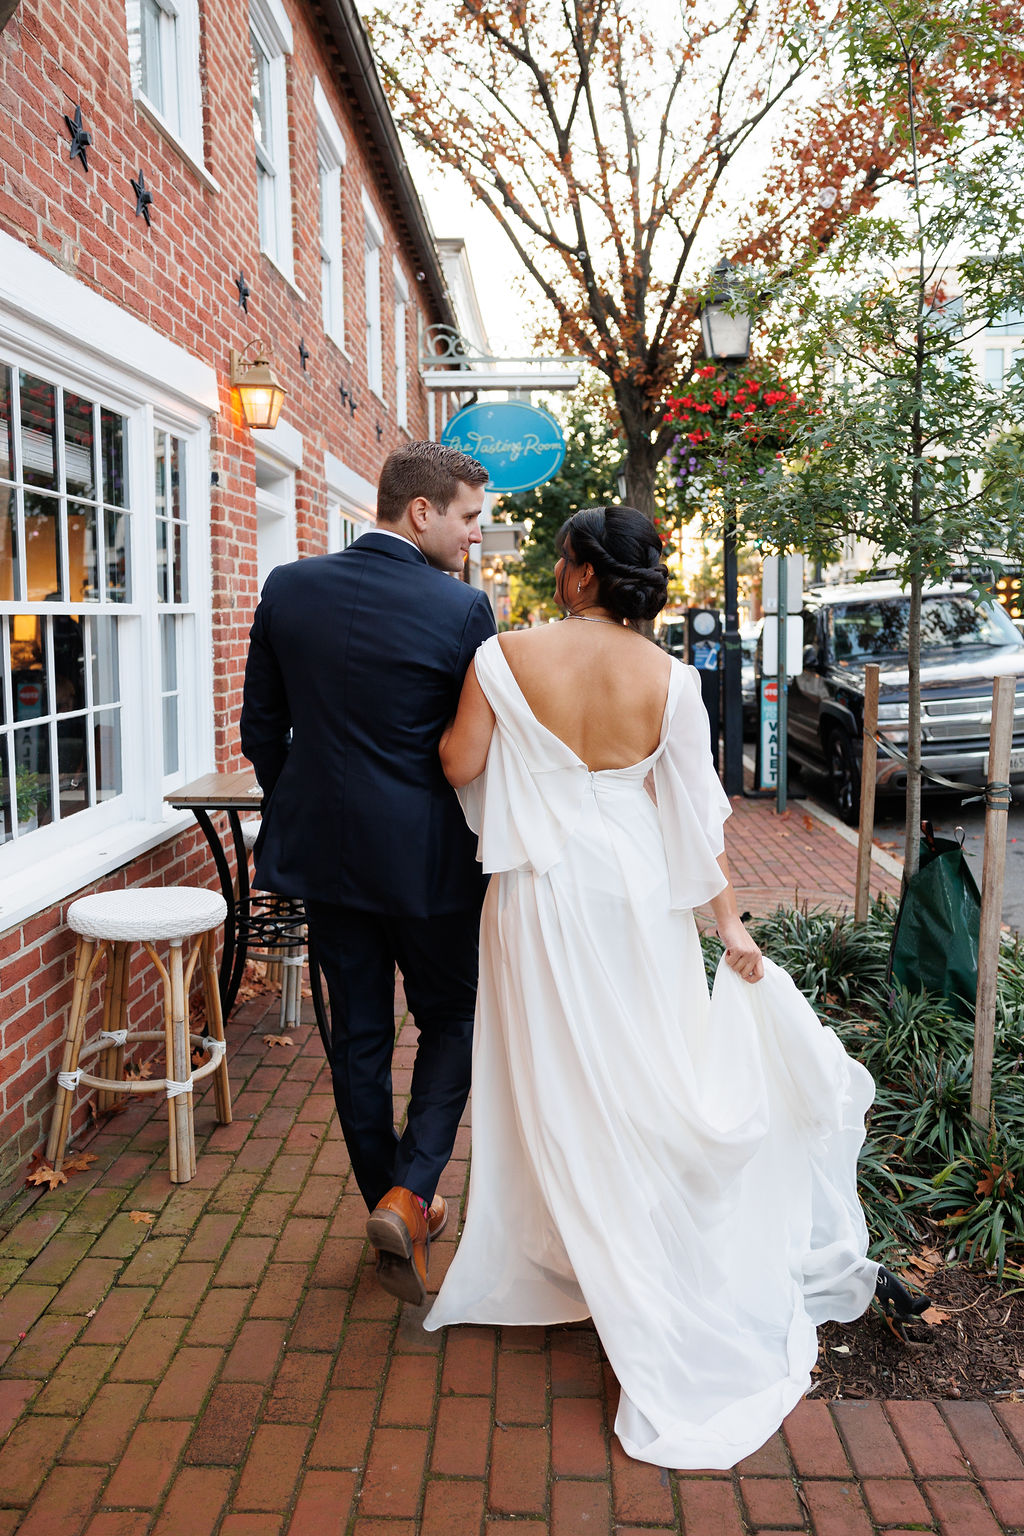 Newlyweds hold hands while walking on the brick sidewalk and holding the train